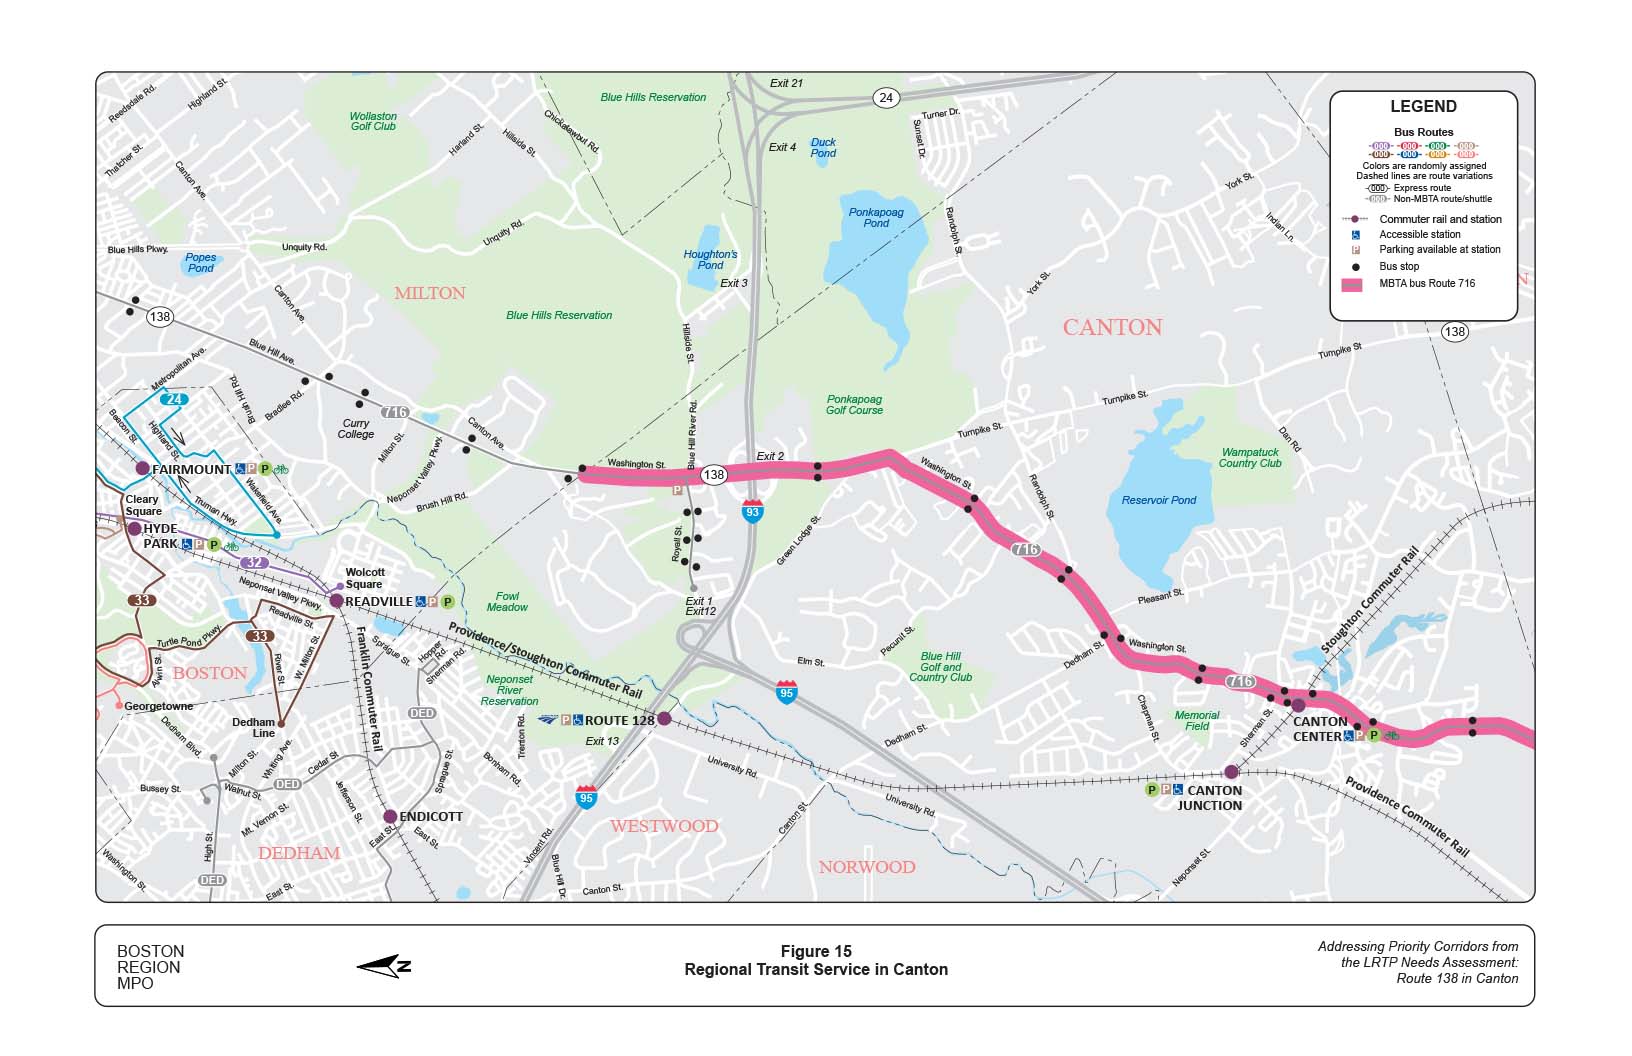 Figure 15 is a map of the study area showing the regional transit service along Route 138.